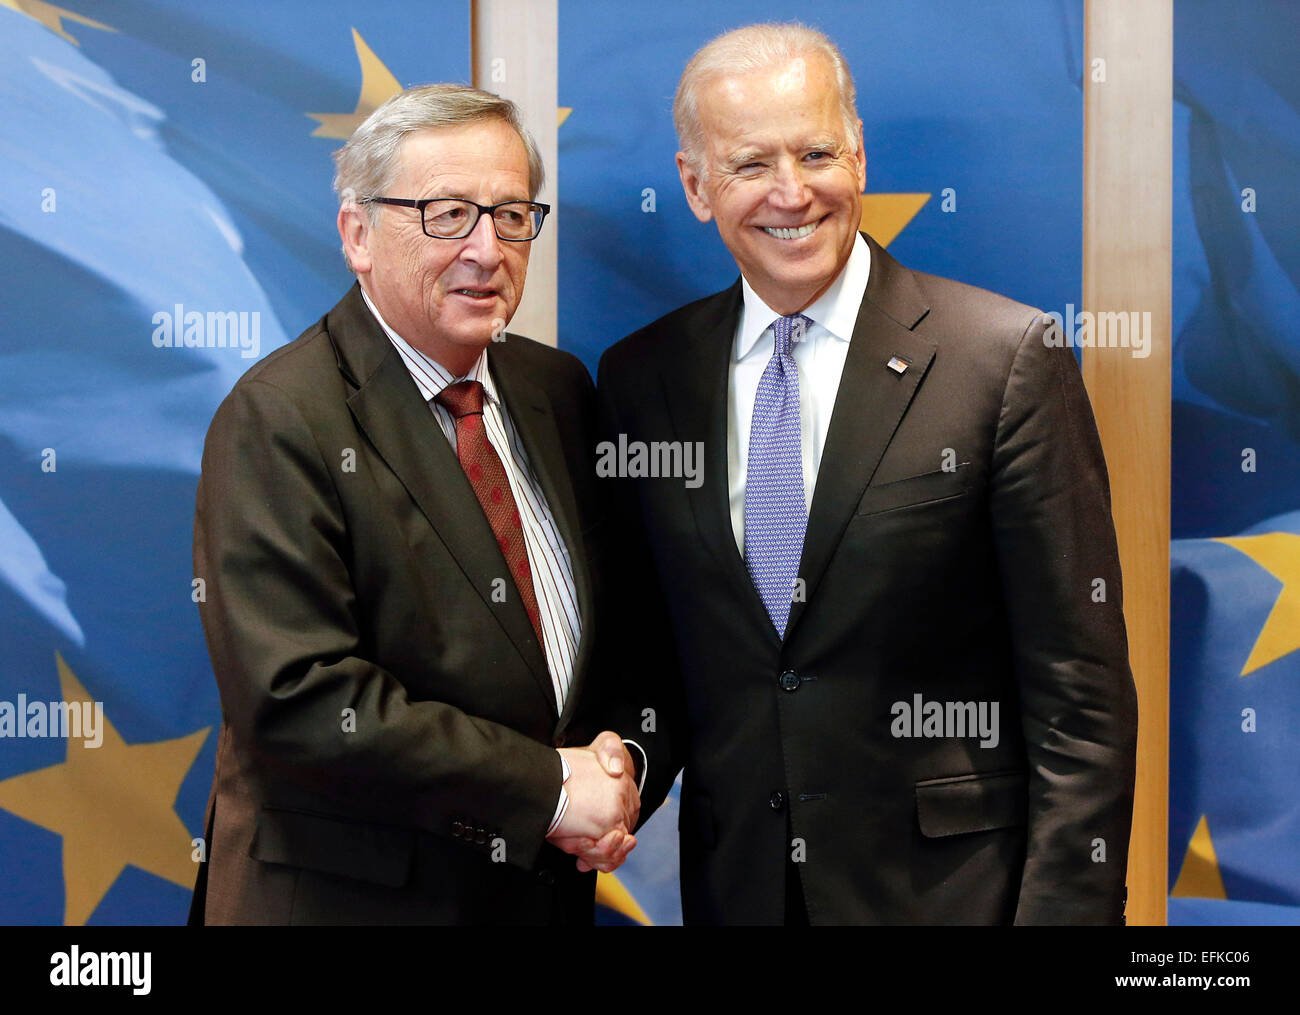 Brussels, Belgium. 6th Feb, 2015. European Commission President Jean-Claude Juncker (L) greets visiting U.S. Vice President Joe Biden prior to their meeting at EU headquarters in Brussels, Belgium, on Feb. 6, 2015. Ukraine and the isssue of free trade will top the agenda of Joe Biden's visit to the EU. Credit:  Zhou Lei/Xinhua/Alamy Live News Stock Photo